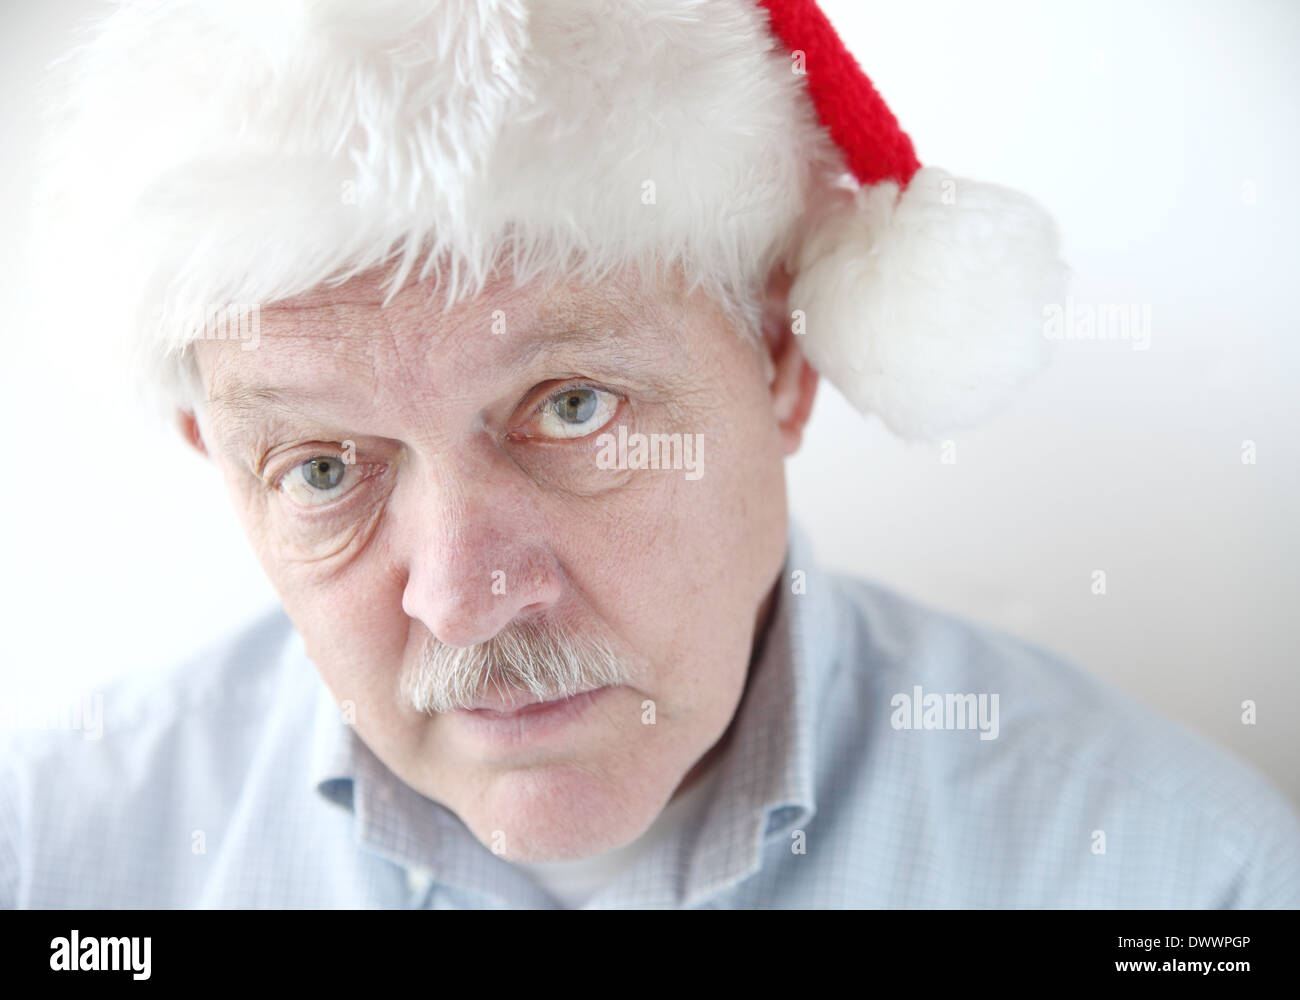 senior man with a compassionate expression Stock Photo